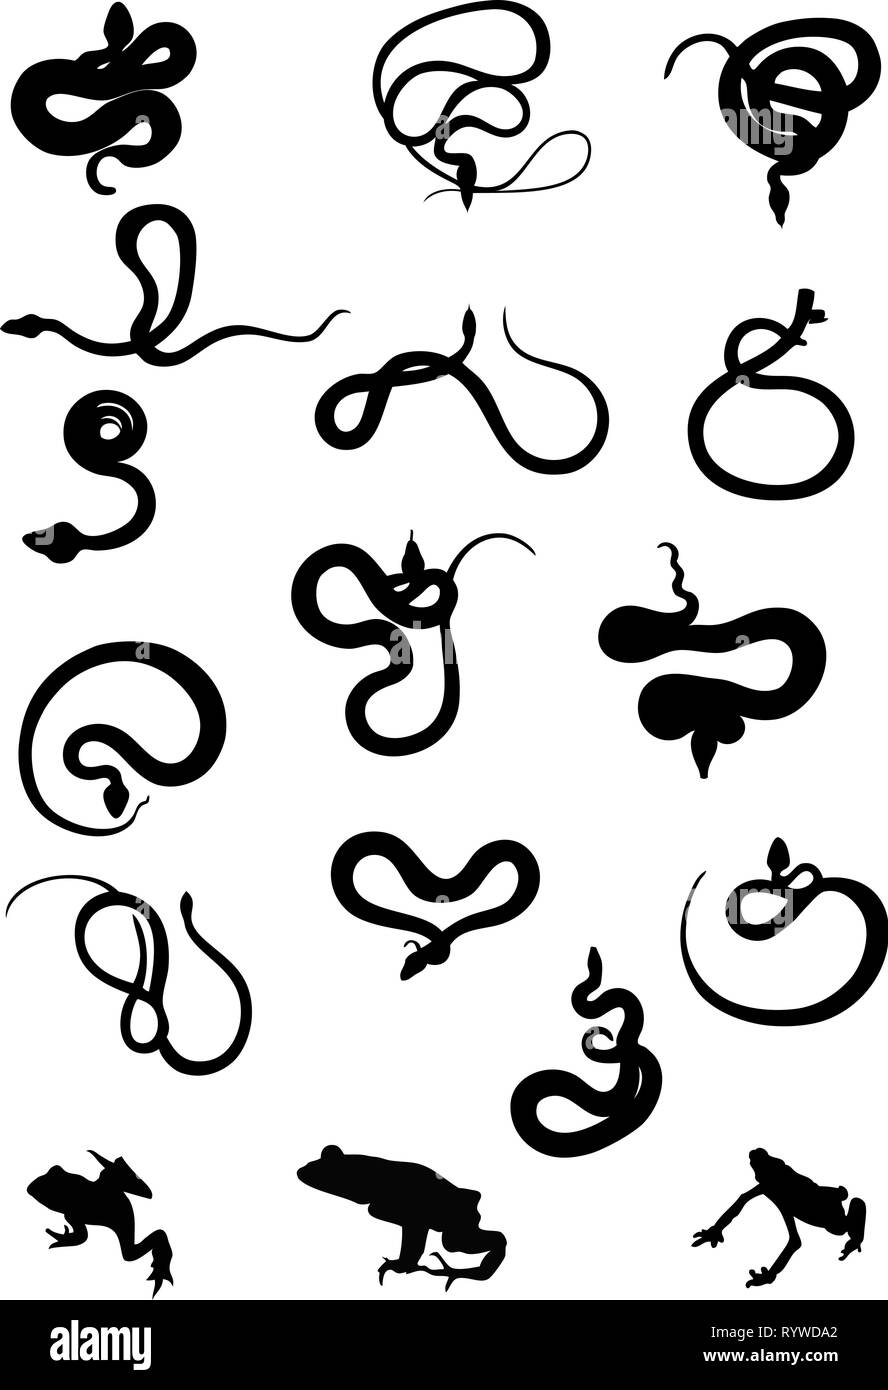 The illustration shows a set of silhouettes of different snakes in black color. Stock Vector